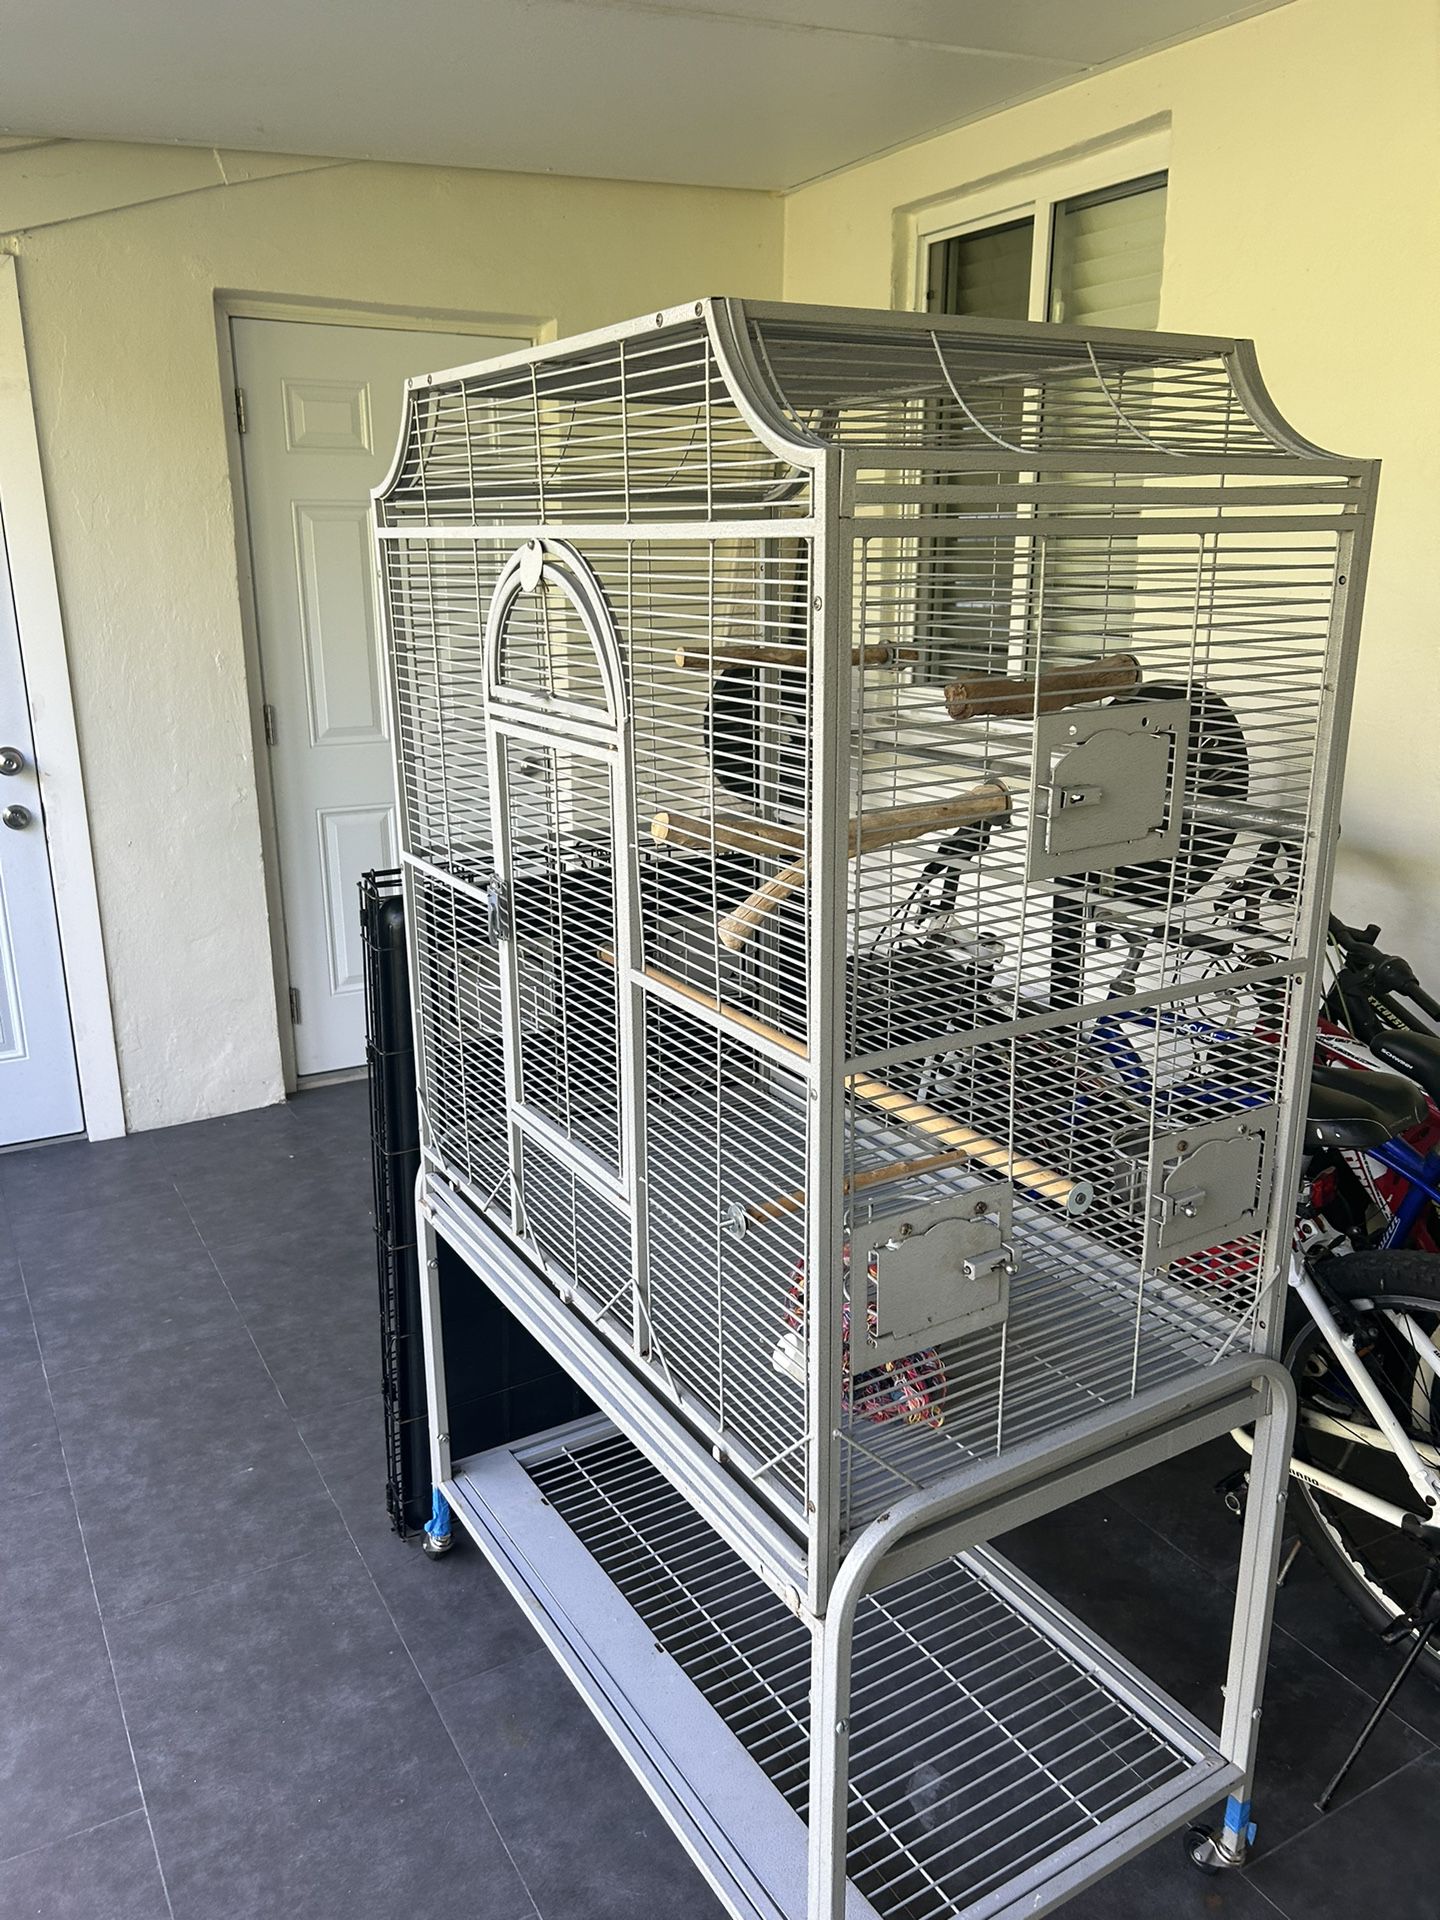 Big Cage For Birds Of Parrots. Very Clean